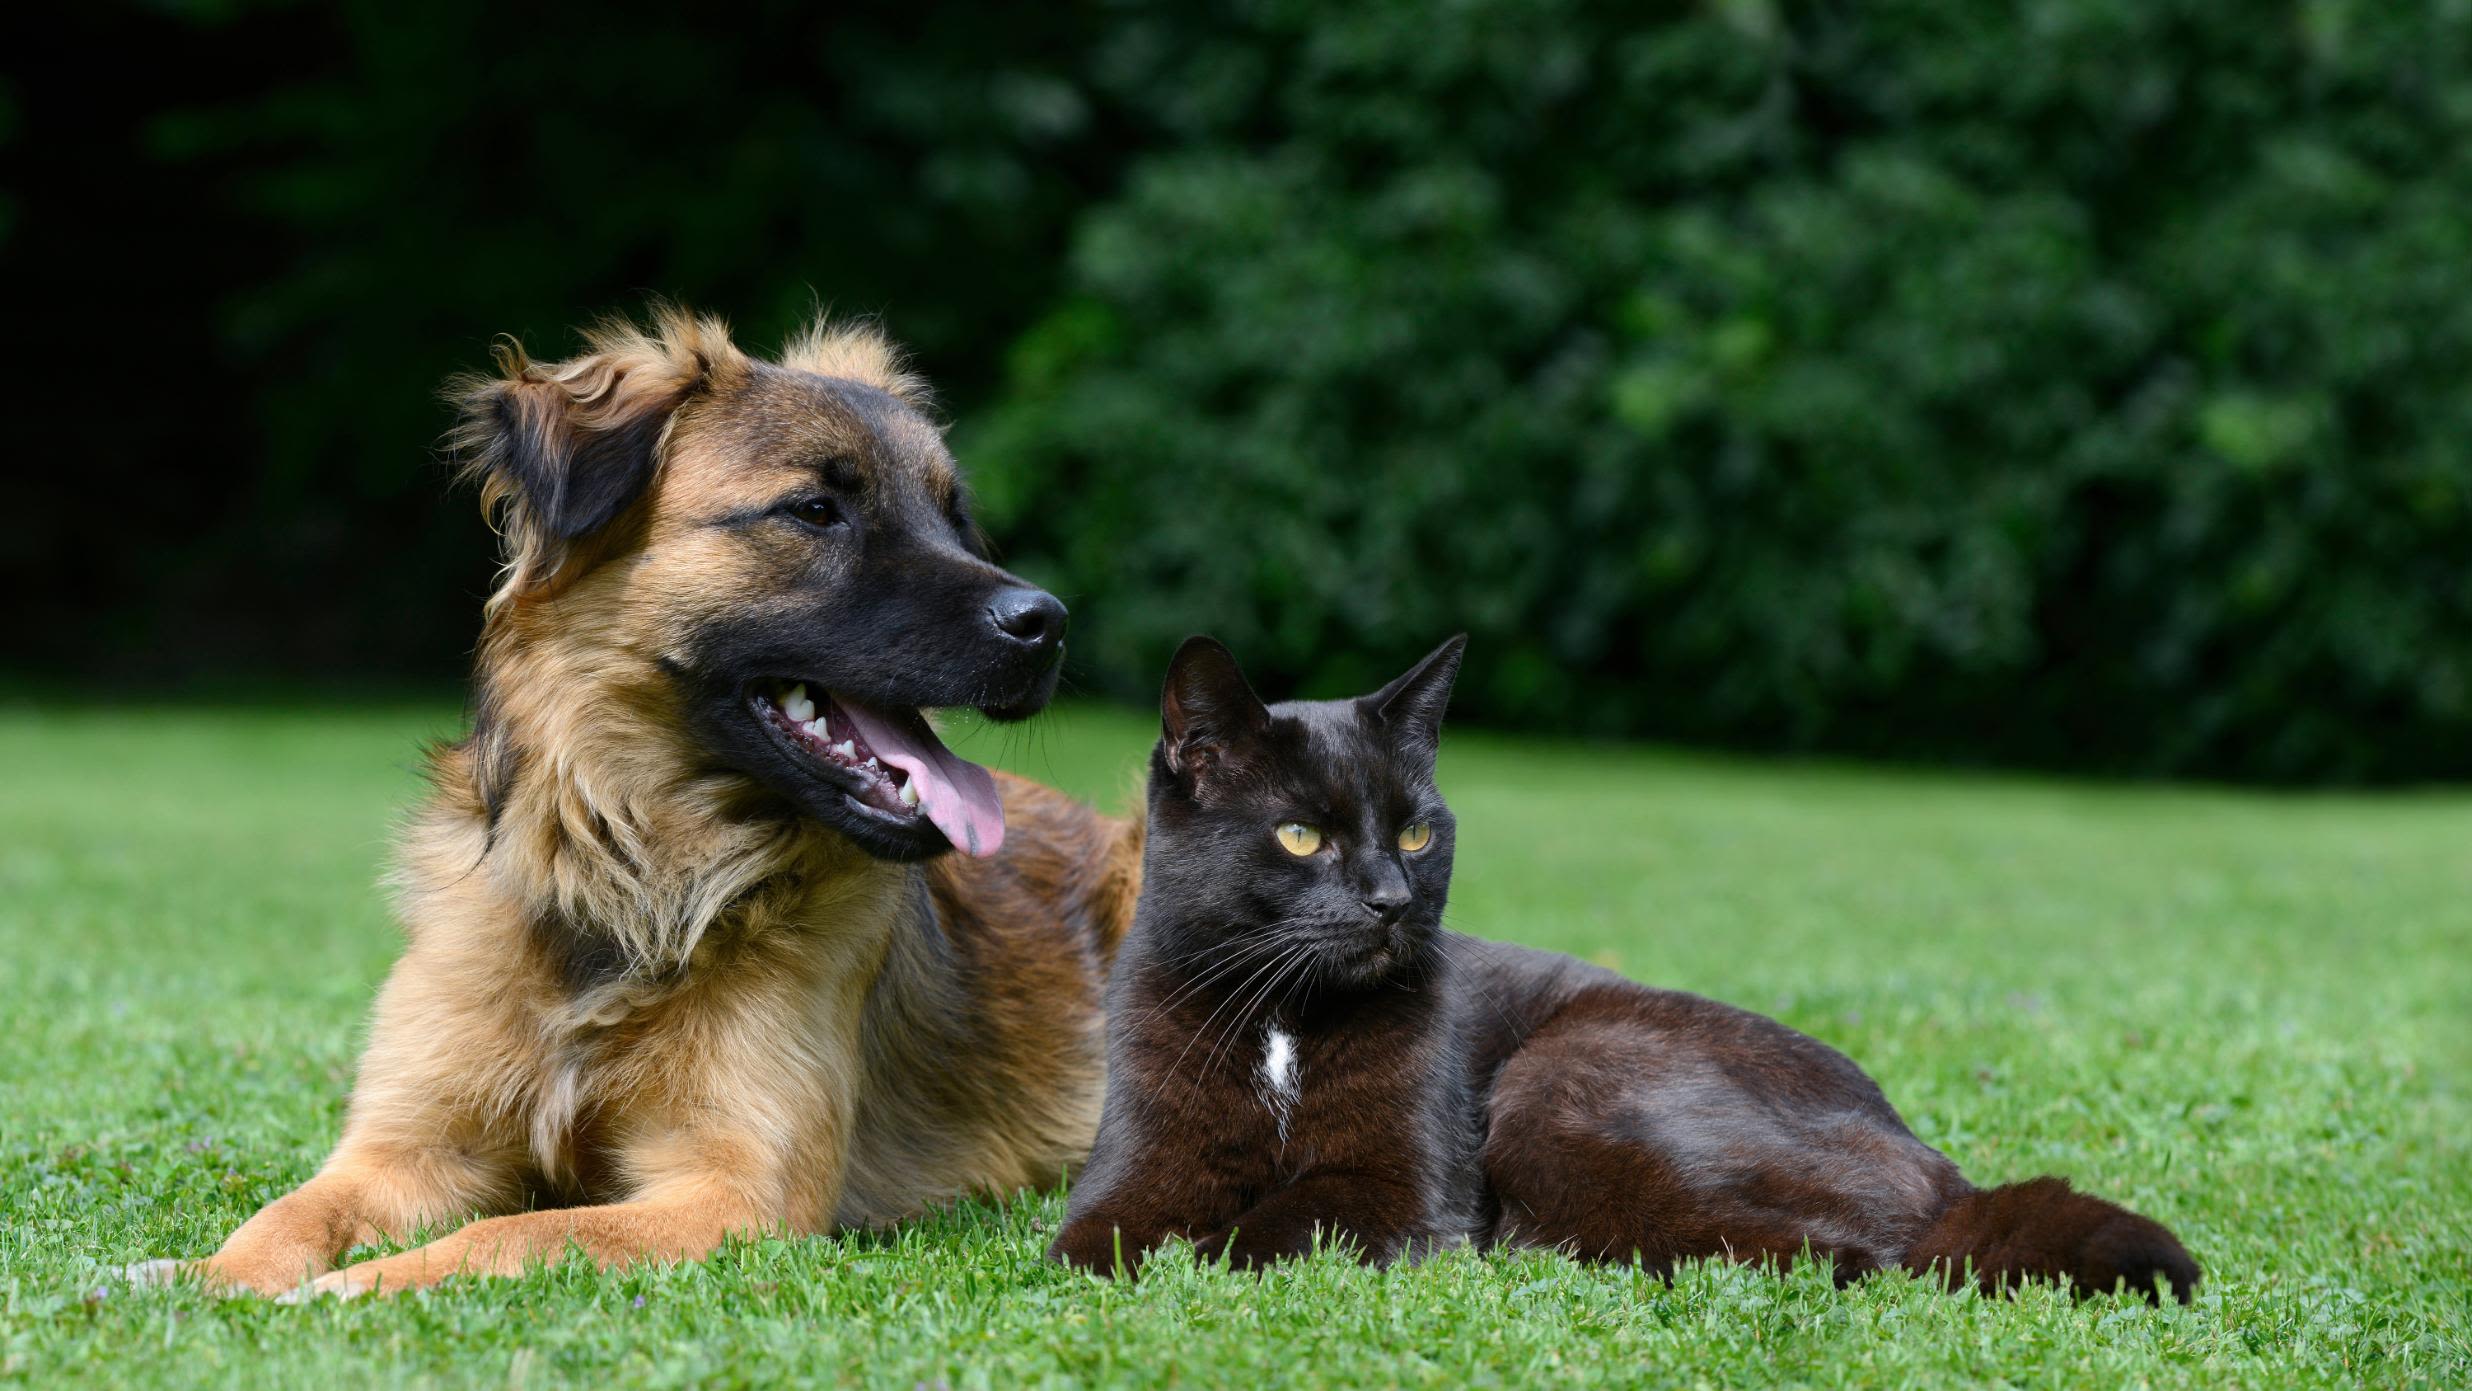 Are Dogs Really Smarter Than Cats?